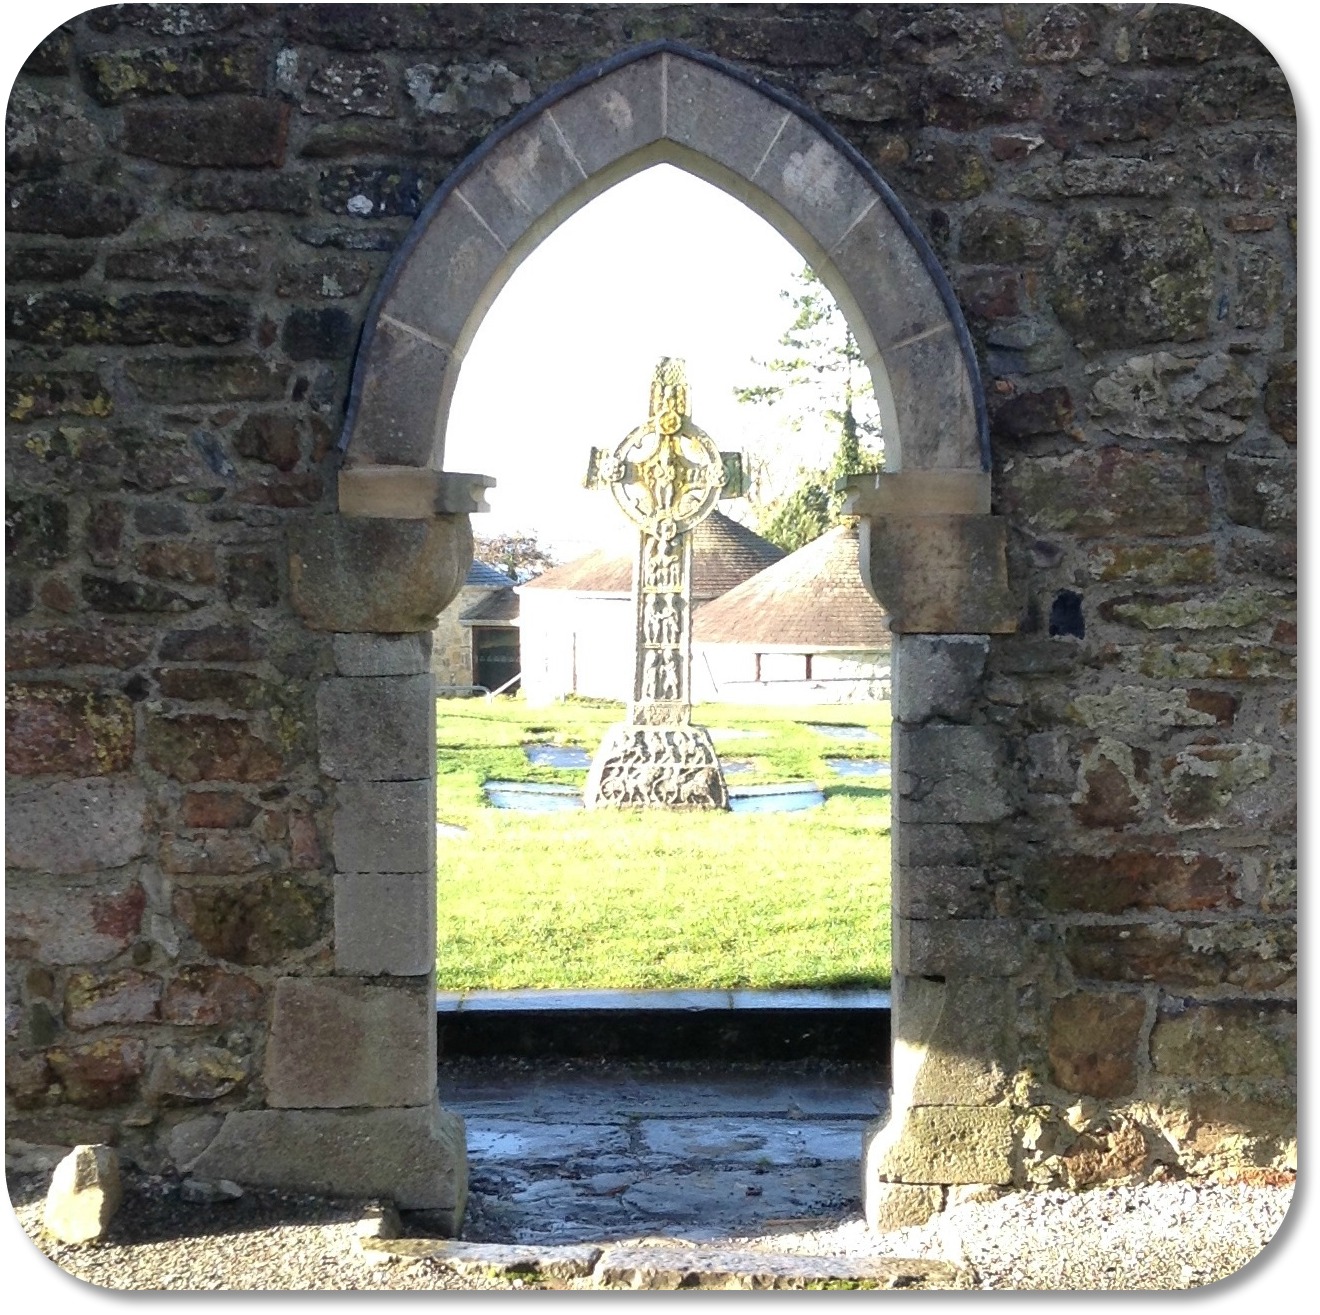 Irish Expressions:  Clonmacnoise Monastery.  Image of High Cross viewed through arched doorway.